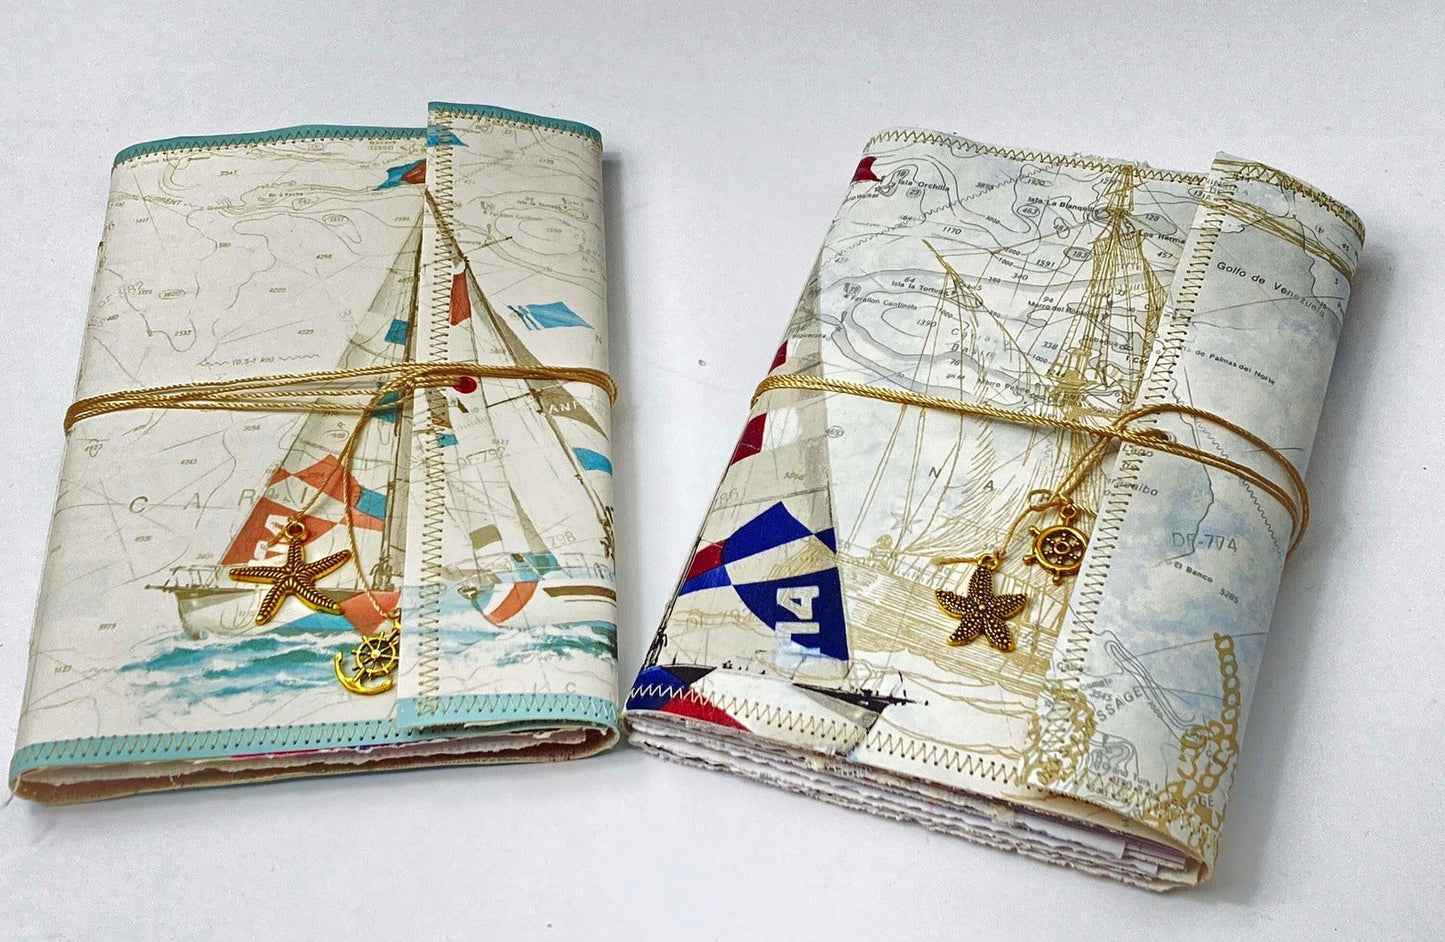 Nautical Theme, Soft Cover Handmade Junk Journal, Travel Journal, Wallet Style, Fits in your Purse